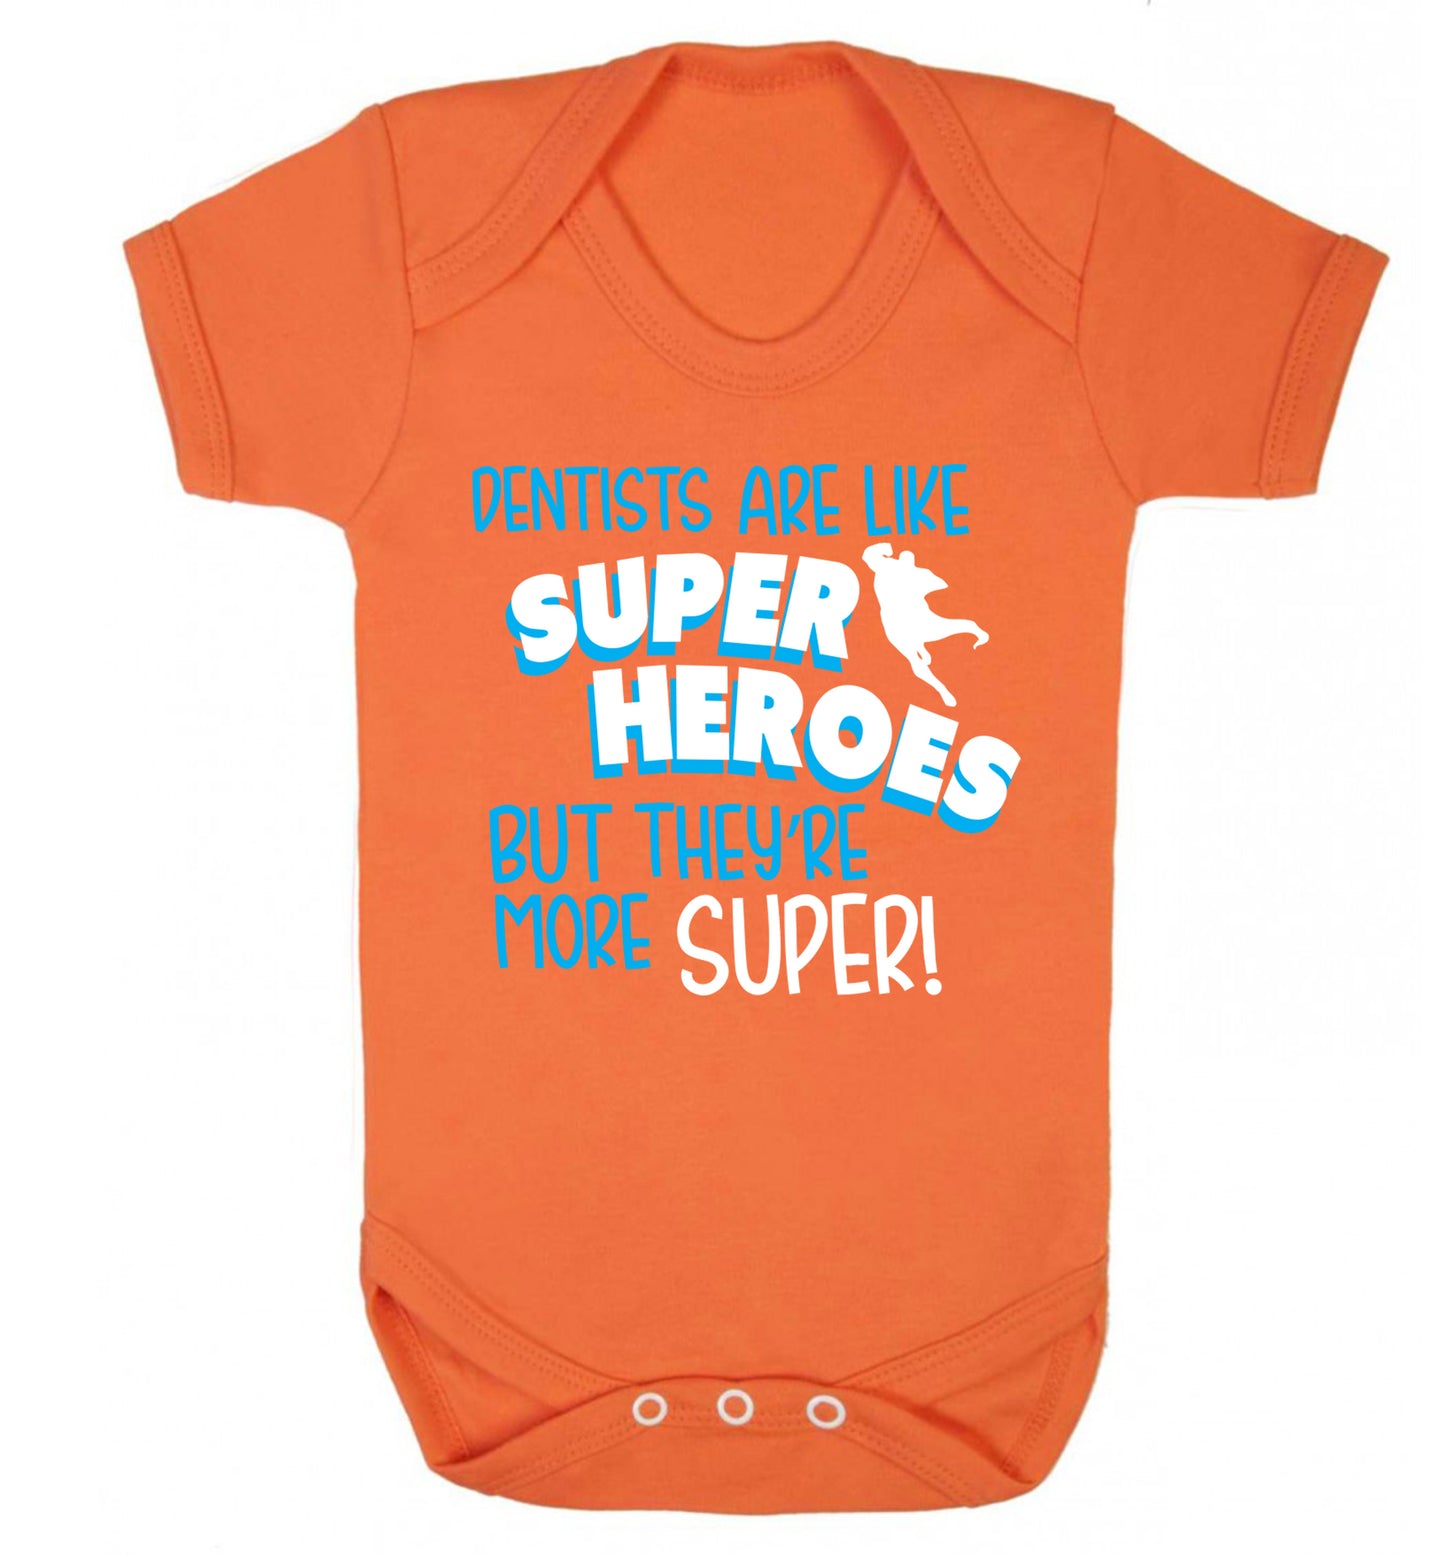 Dentists are like superheros but they're more super Baby Vest orange 18-24 months